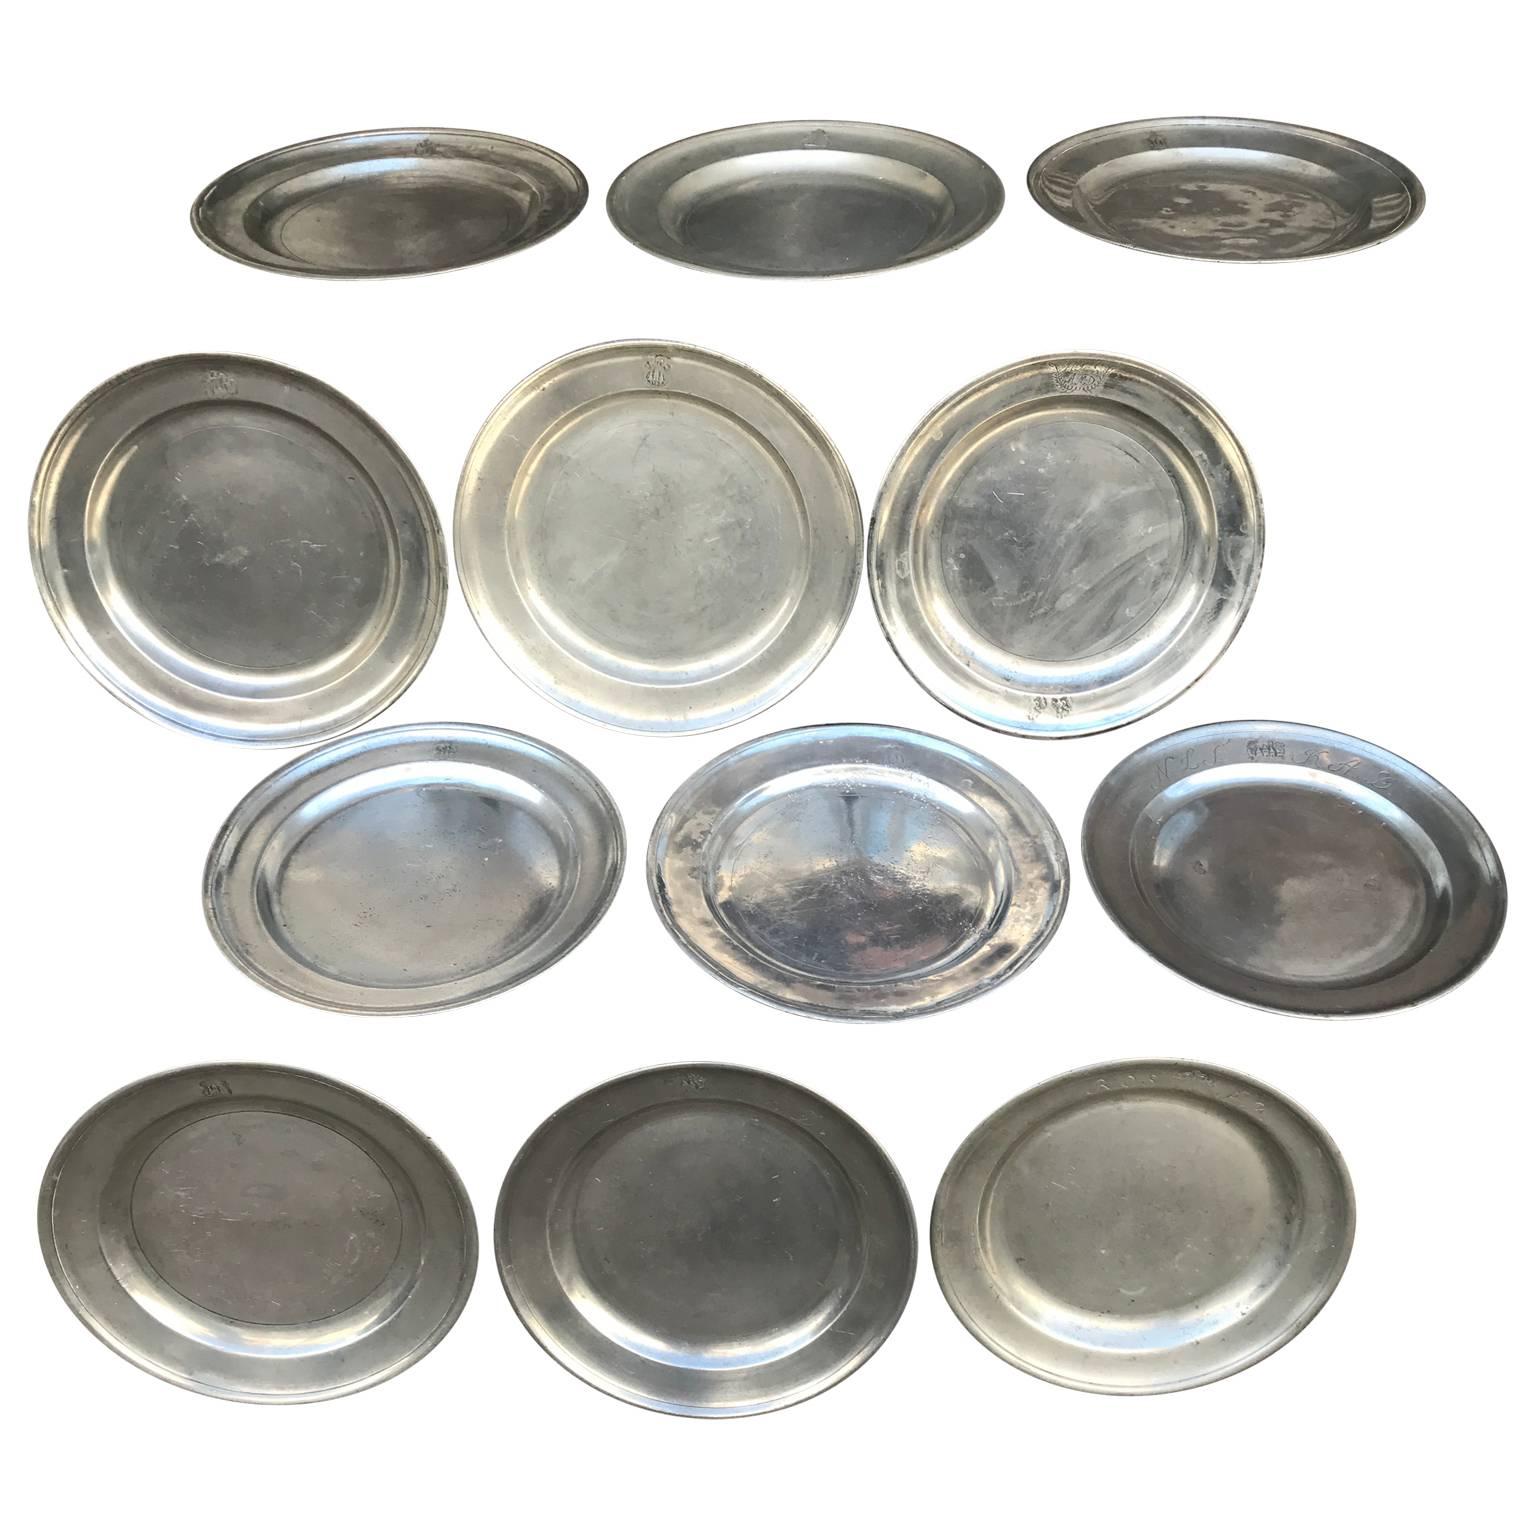 Collection of 12 pewter plates from different makers, same style and with only slight differences in size. Each have makings of Copenhagen makers.
 